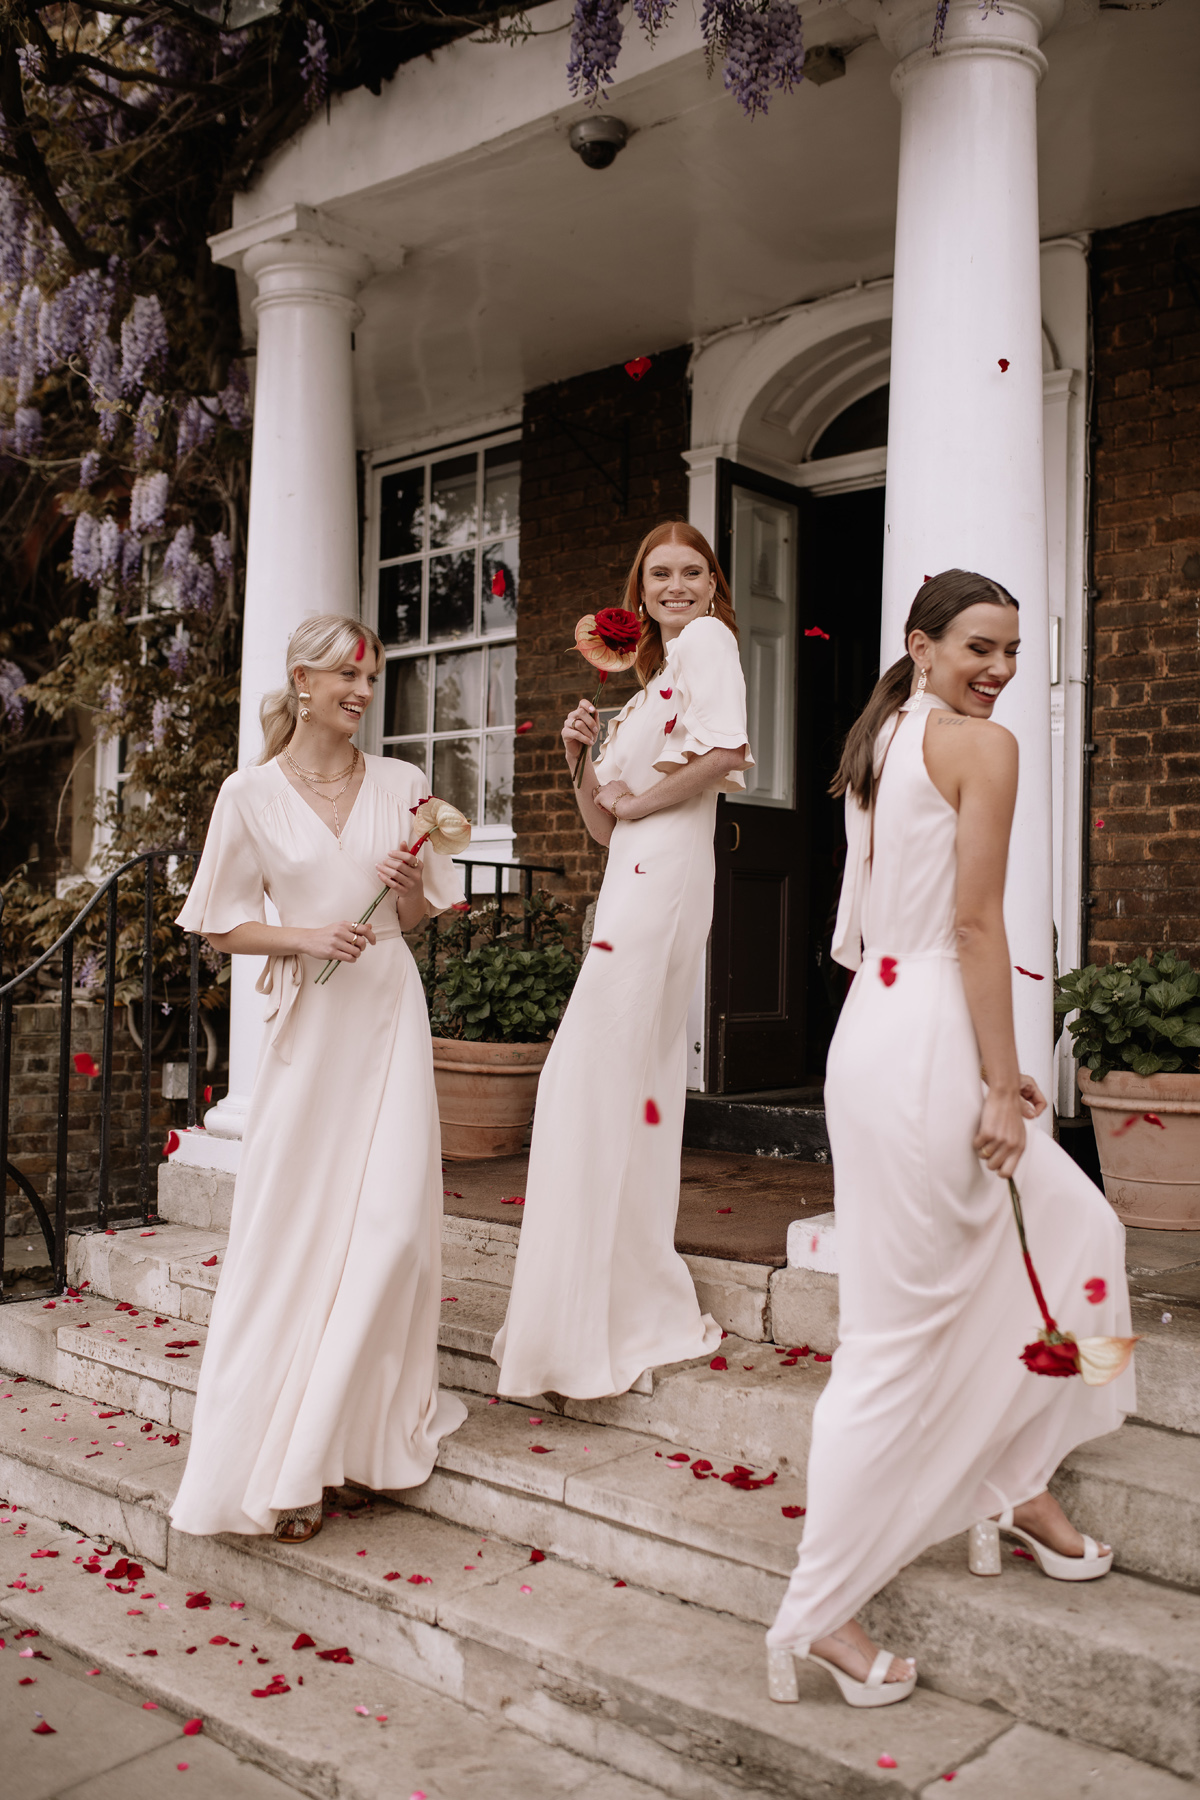 Cream and white bridesmaids dresses by Maids to Measure